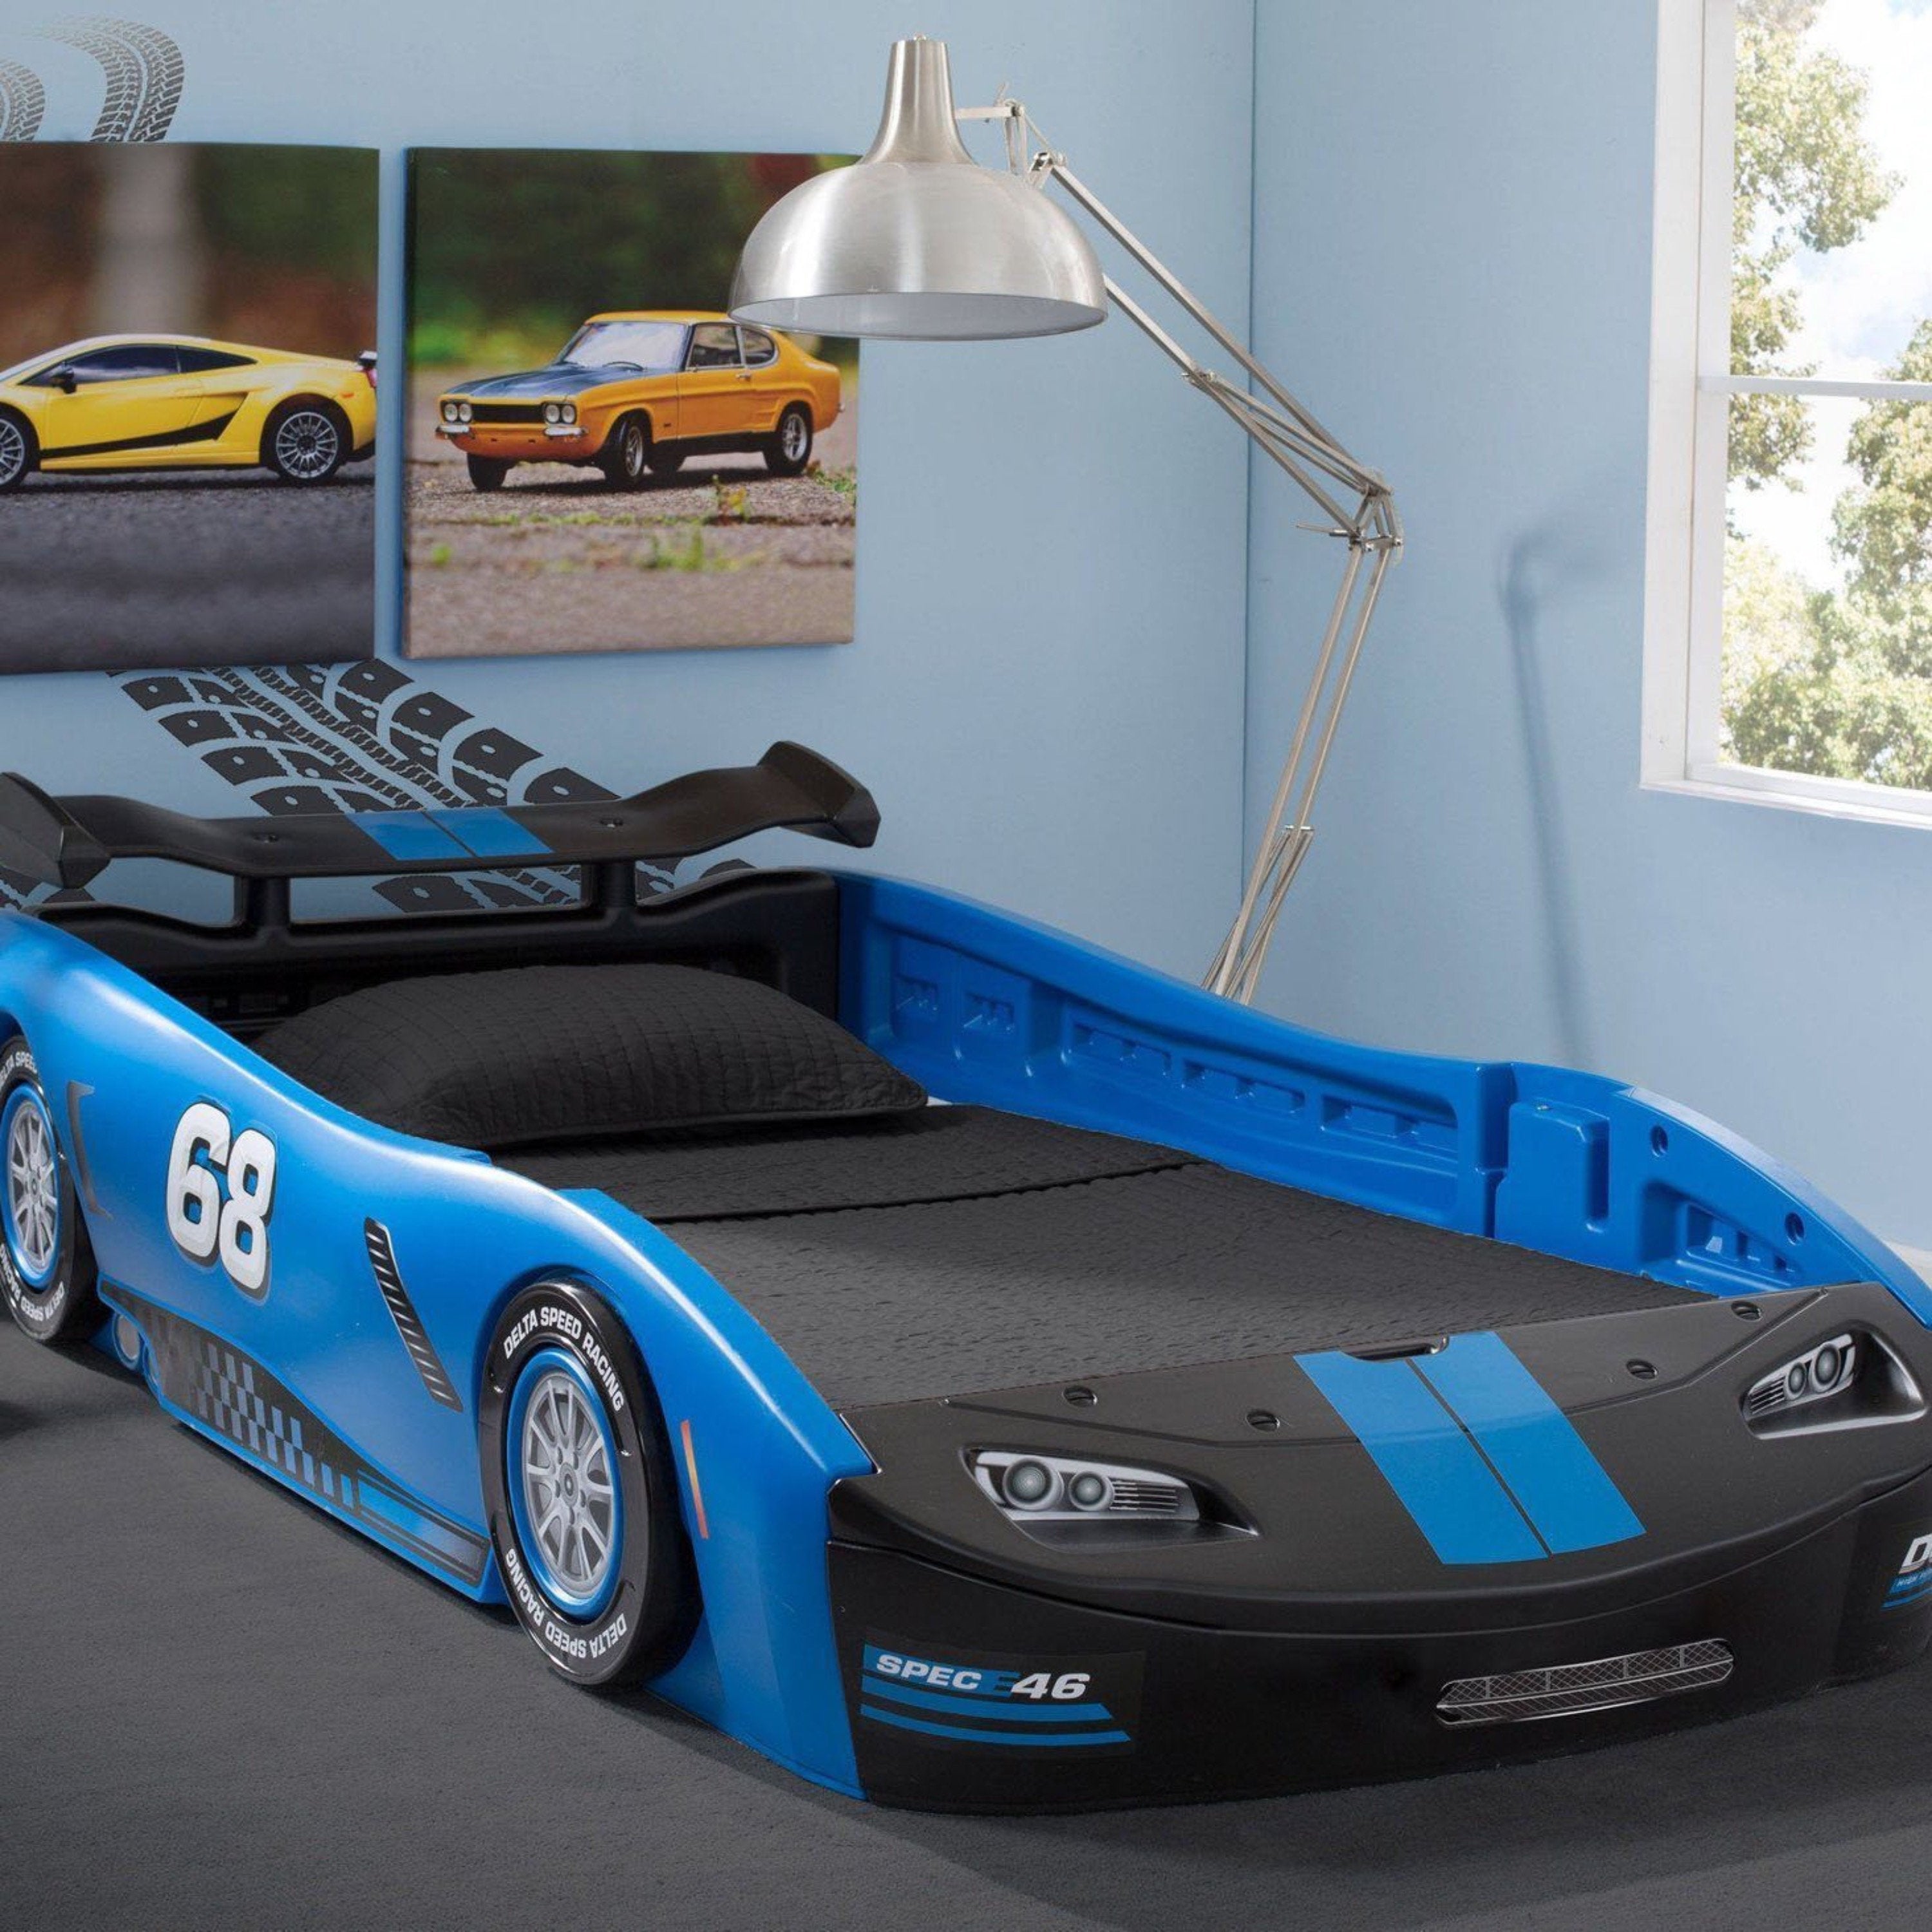 Twin Car Bed